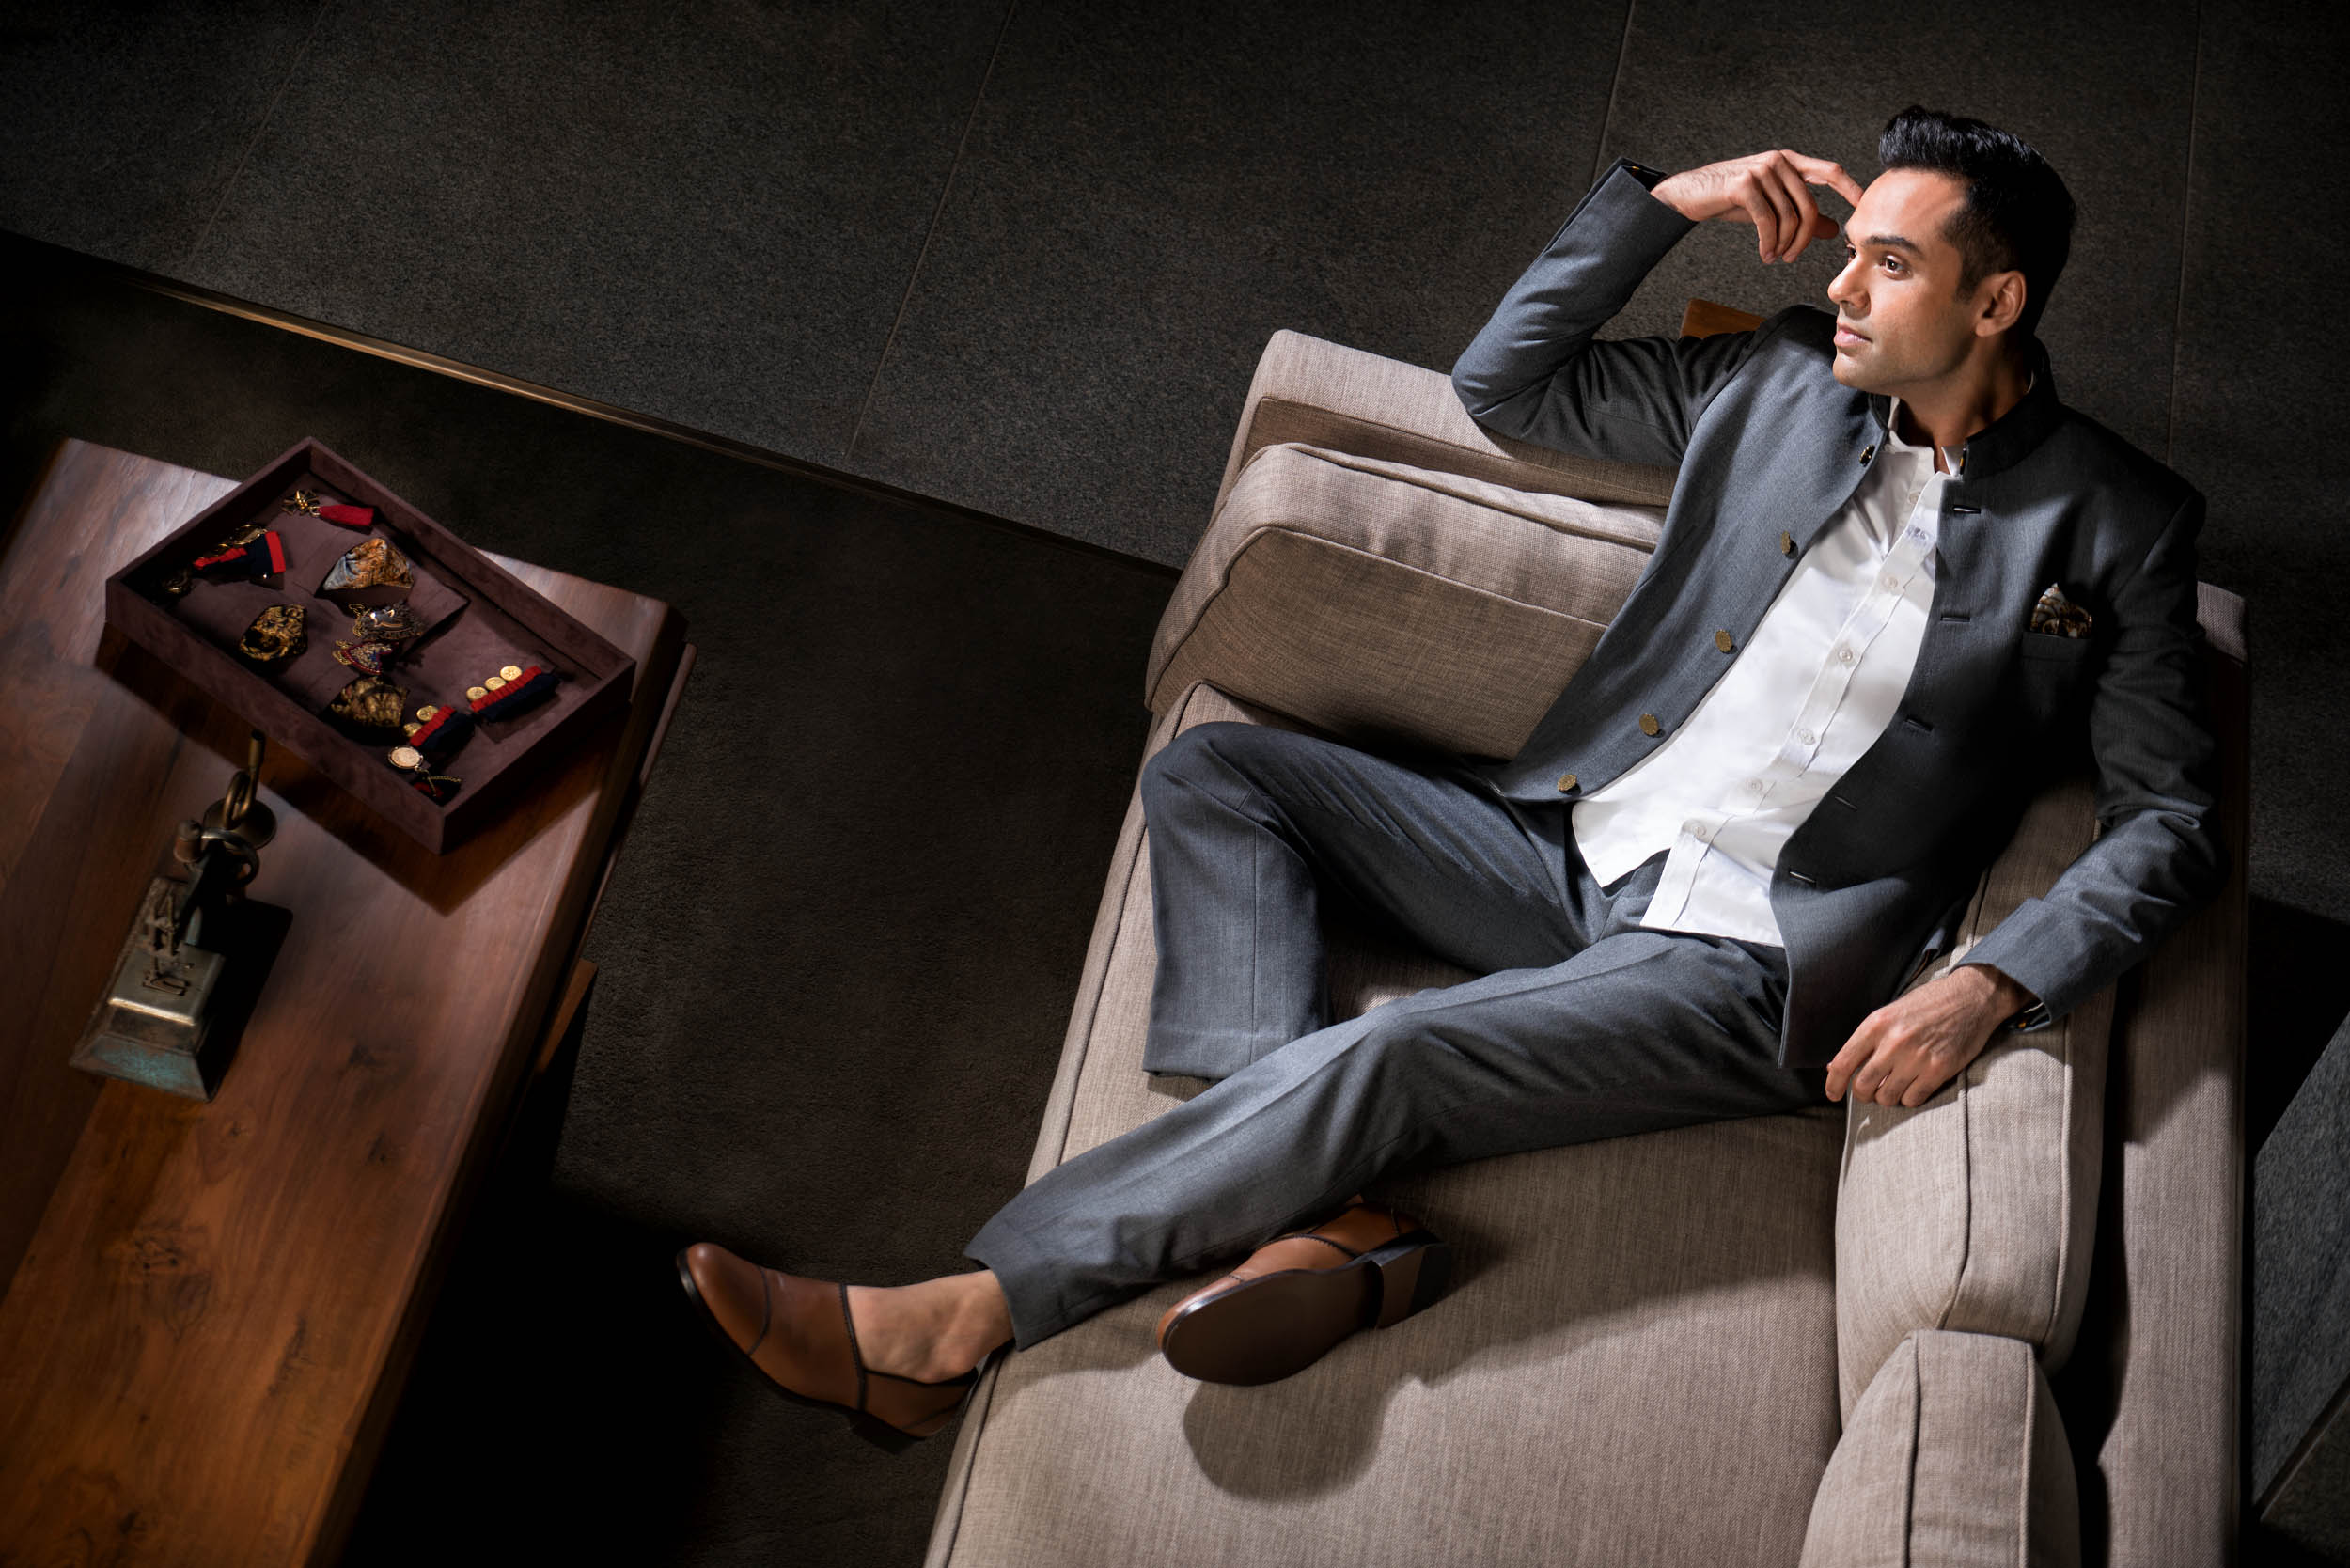 Best Bollywood Photographer in India, Vikram Bawa, Actor Abhay Deol for Hello magazine, Shooting with Star, Celebrity, Magazine, Editorial, Commissioned work, Fashion, Glamour, Lifestyle, Best Fashion Photographer Vikram Bawa, Mumbai, India